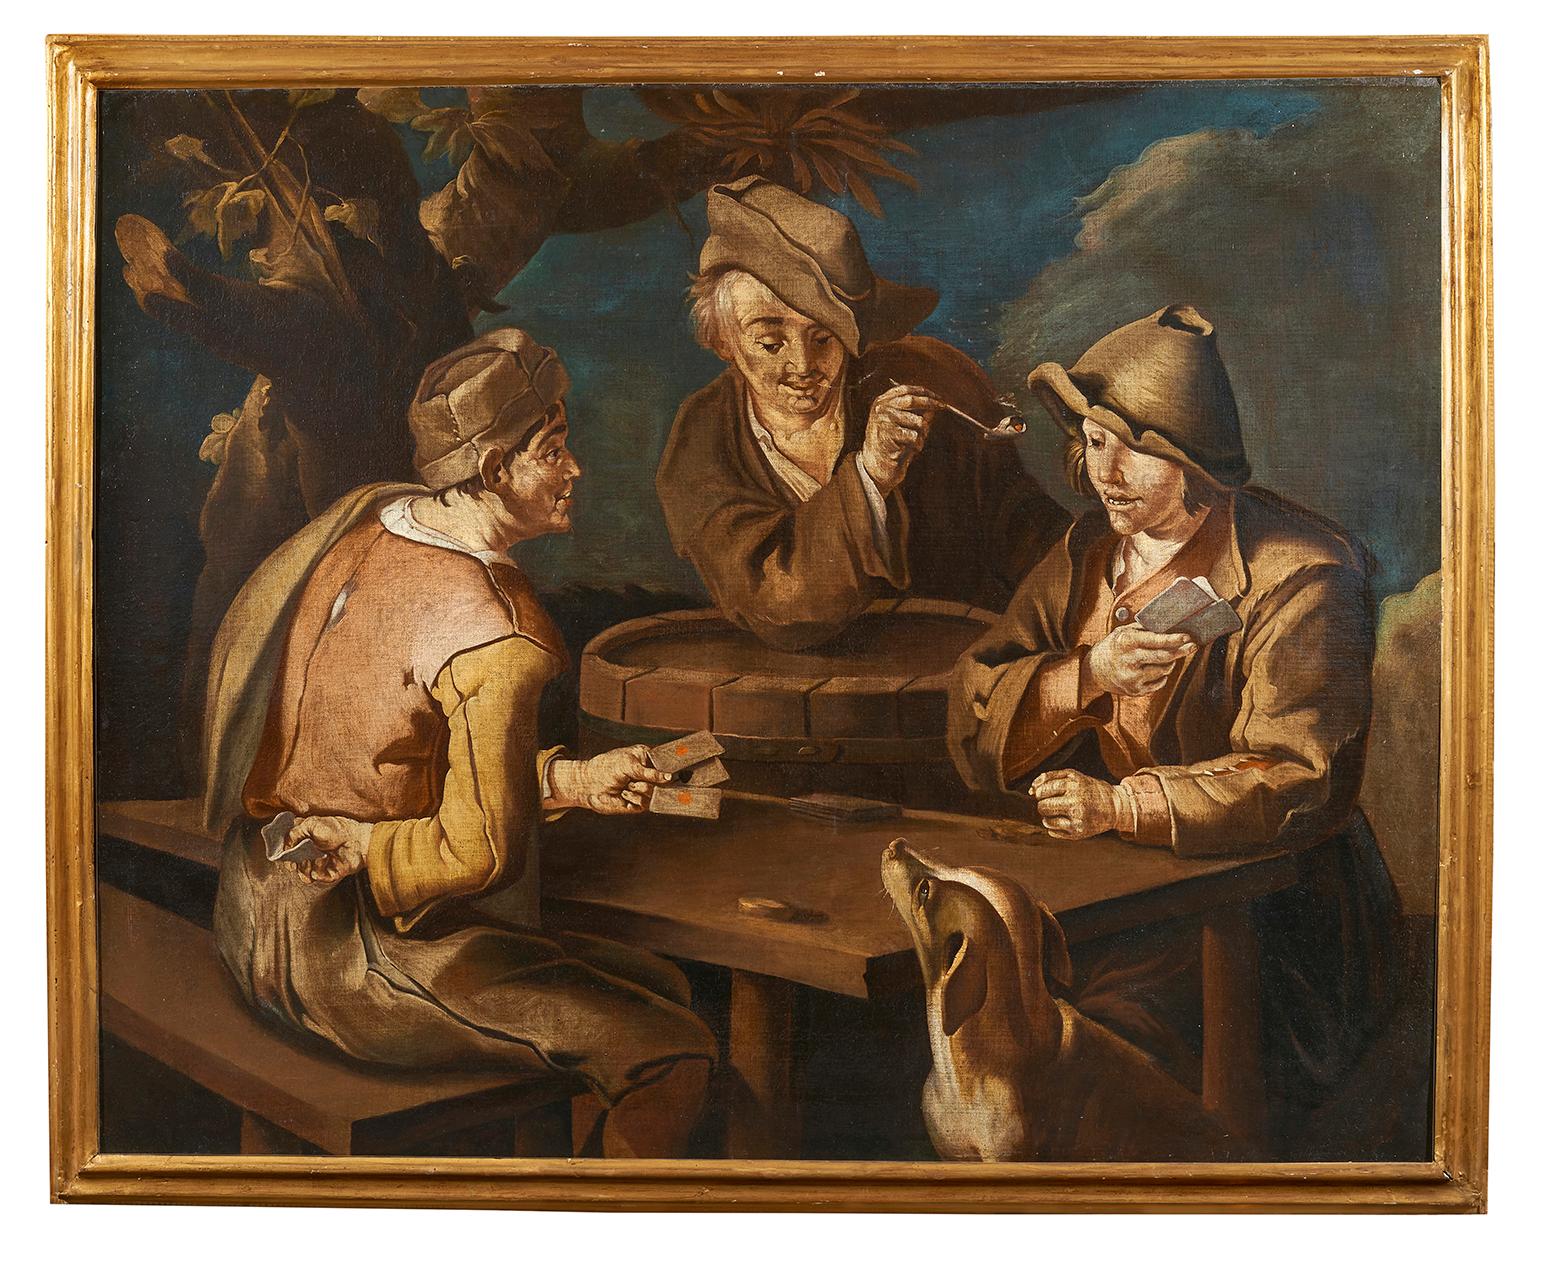 Painting oil on canvas with dimensions of 119 x 149 without frame and 130 x 160 cm with frame depicting a scene en plen air with a dog and card players of the painter Giacomo Francesco Cipper called the Todeschini. 

The different variants of this